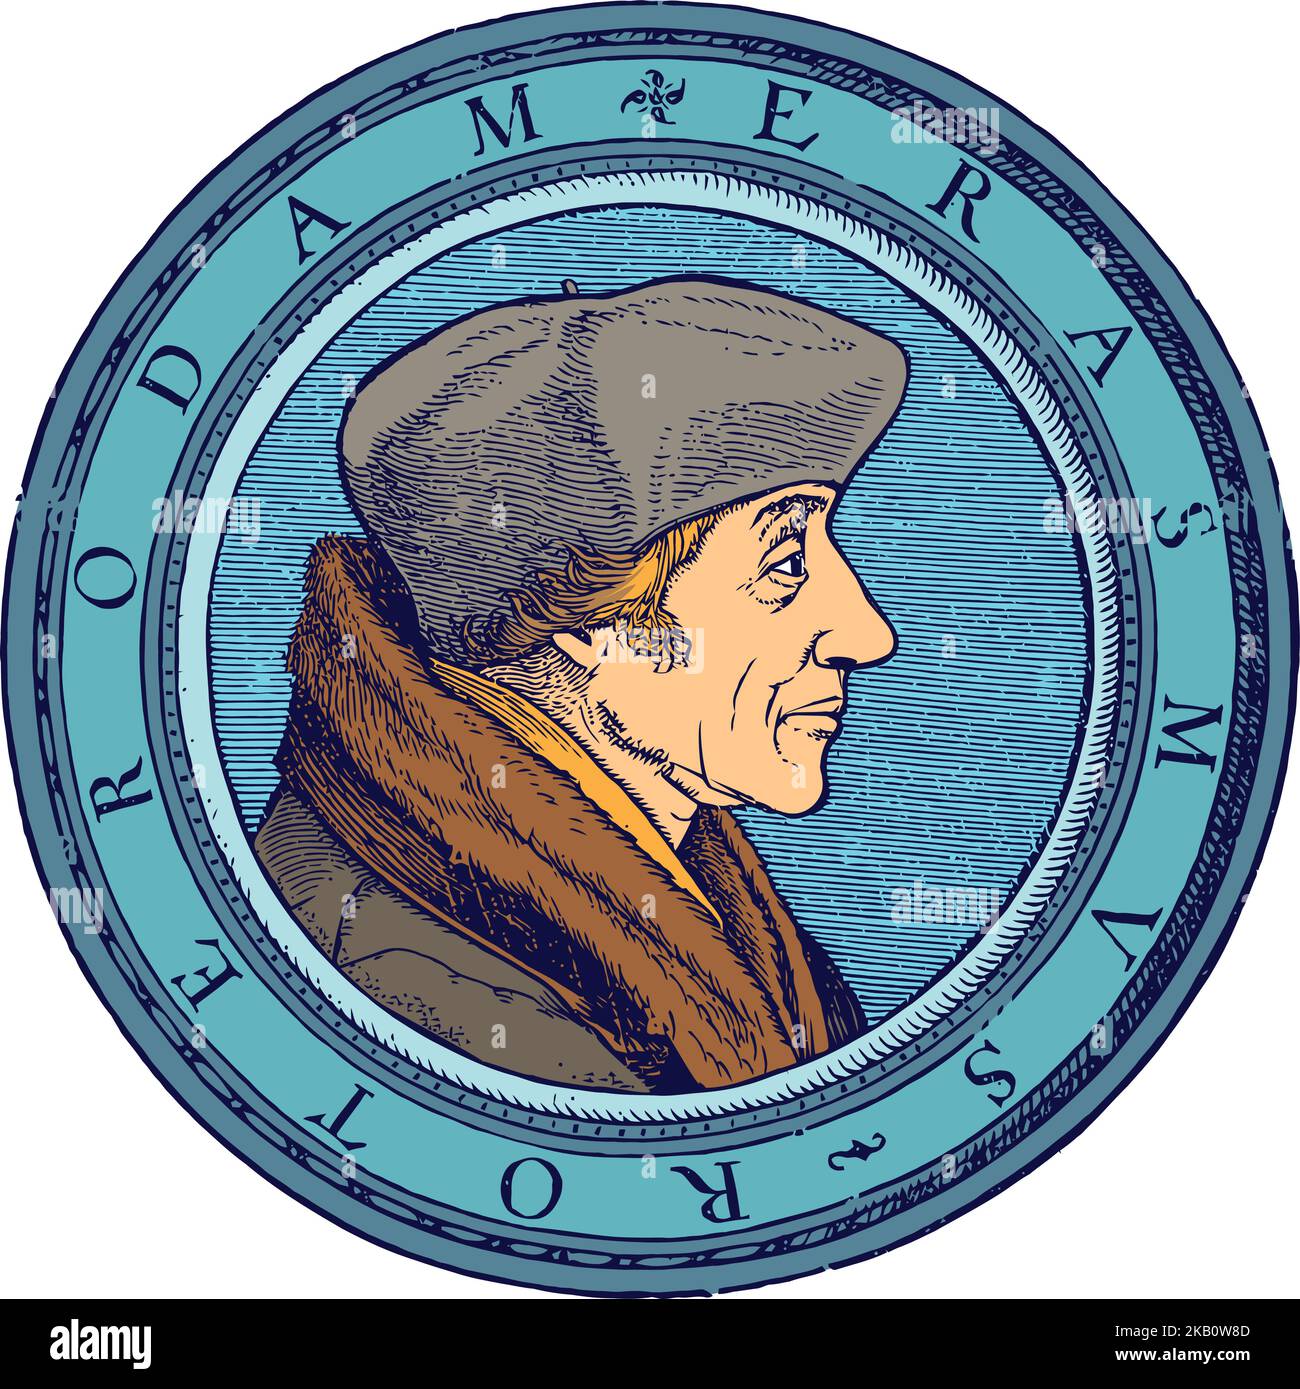 Portrait of Desiderius Erasmus Roterodamus, known as Erasmus or Erasmus of Rotterdam, was a Dutch Christian humanist who was the greatest scholar of t Stock Vector